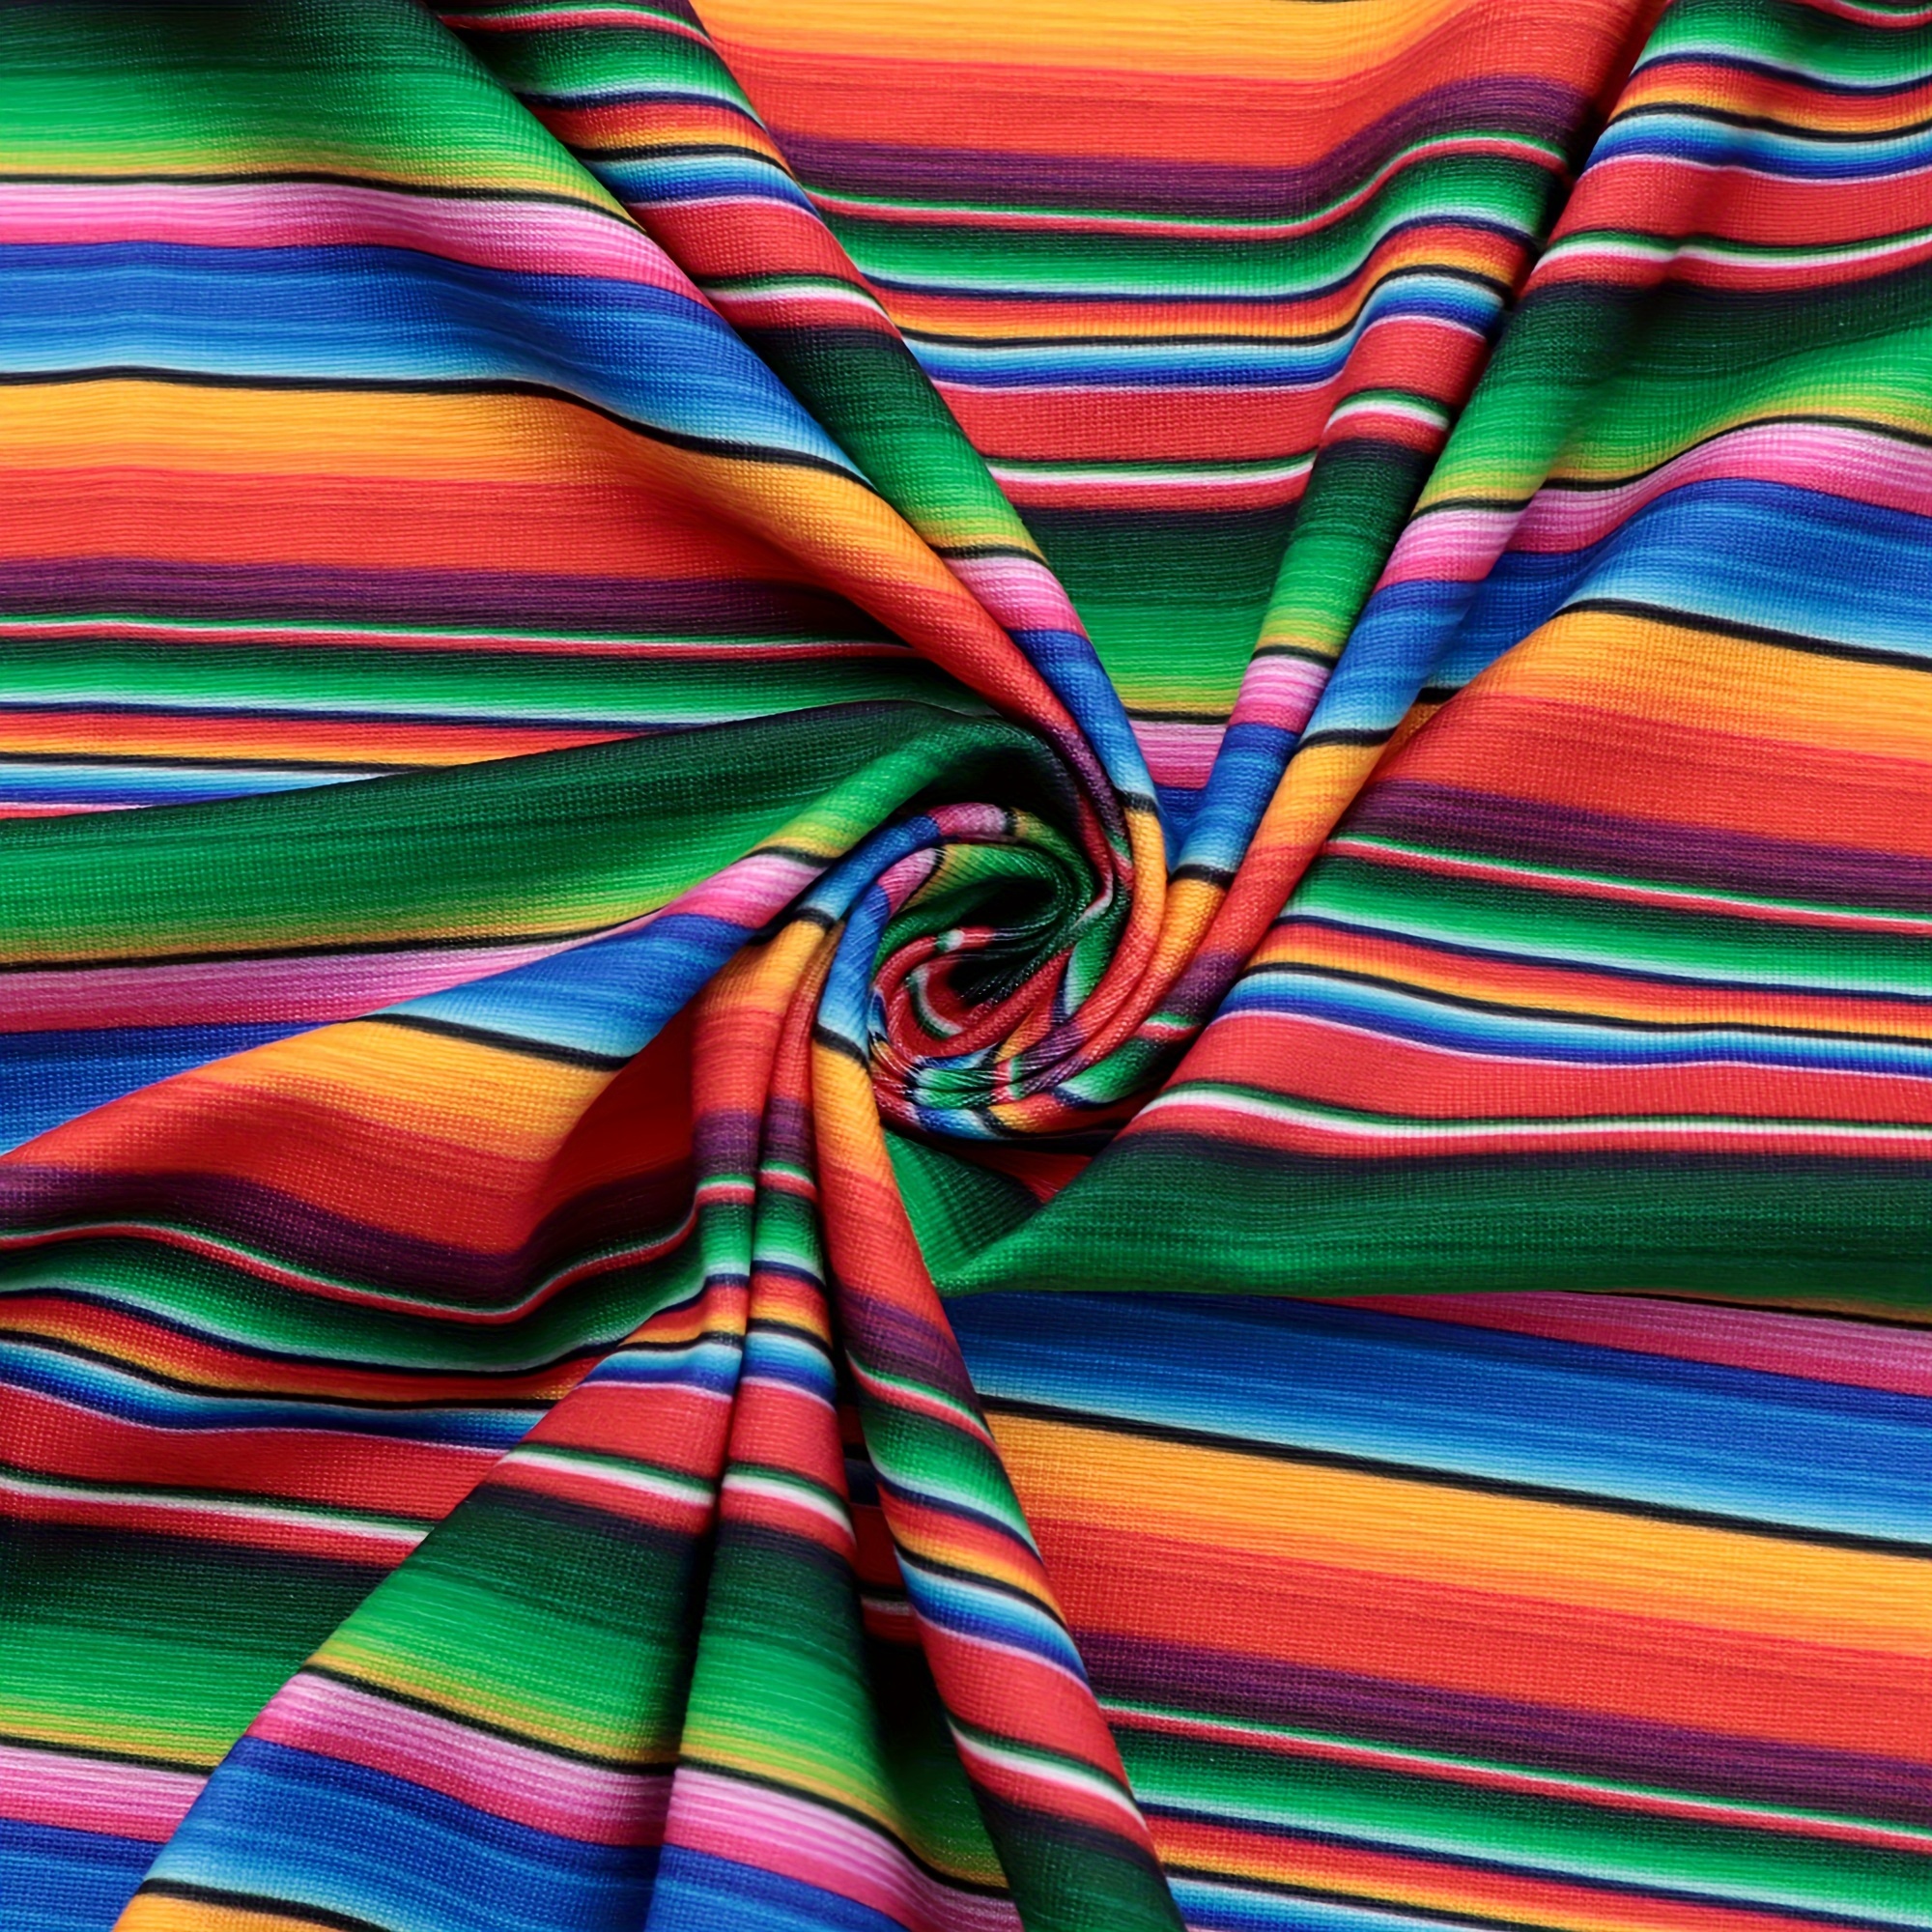 

1pc Colorful Ethnic Stripe Printed Double Brushed Polyester Fabric Soft Smooth 4 Way Stretch Knit Fabric For Dress Sewing